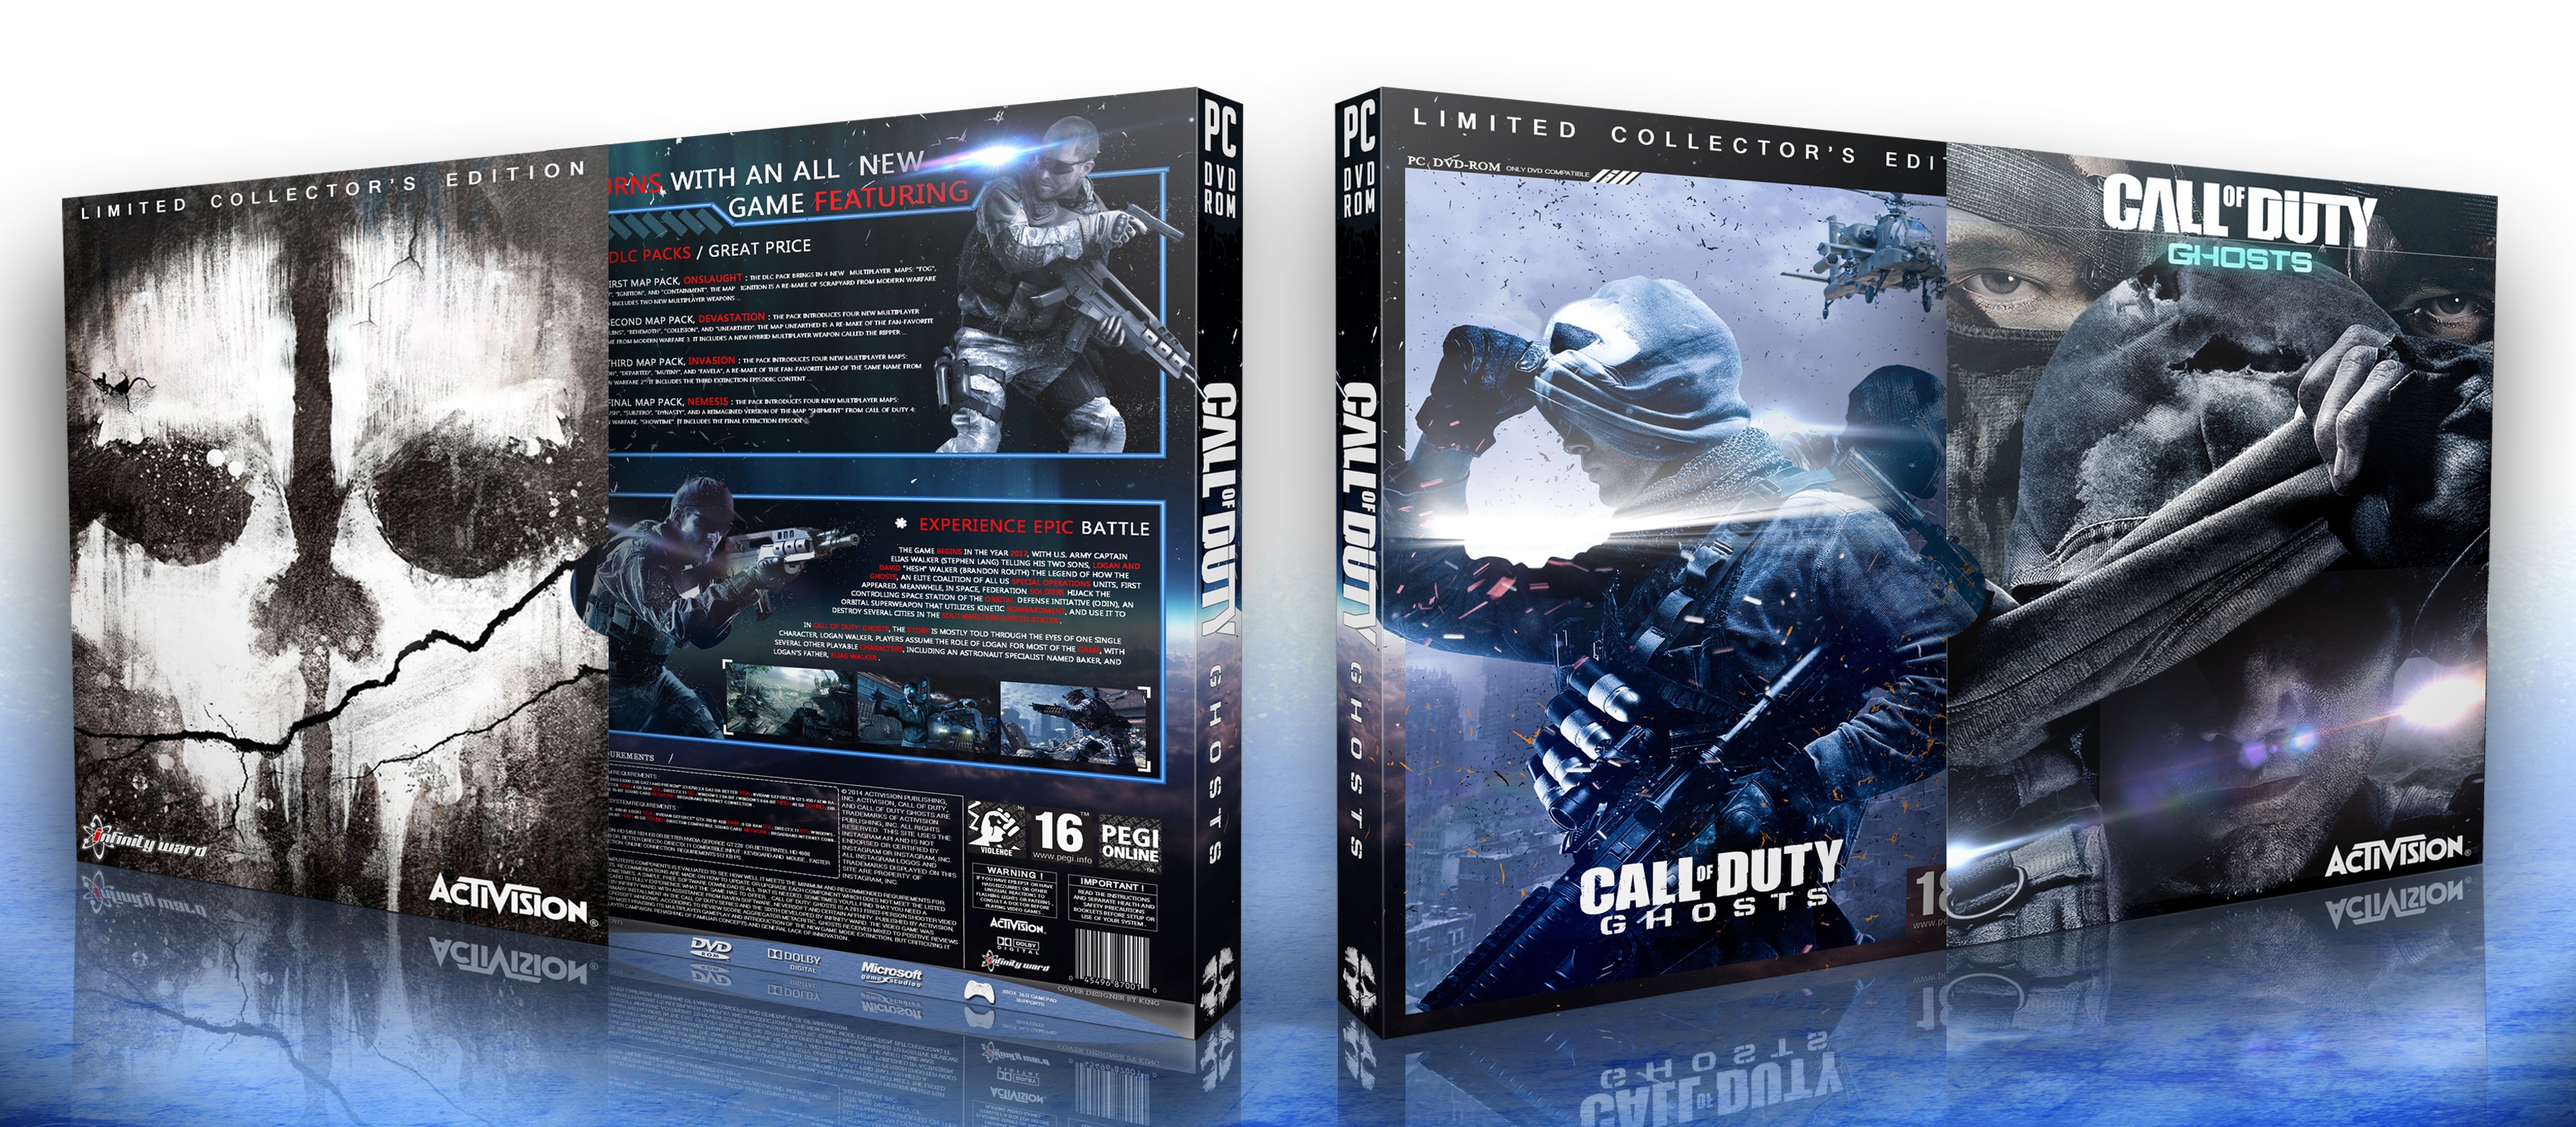 Call of Duty Ghosts Limited Collector's Edition box cover